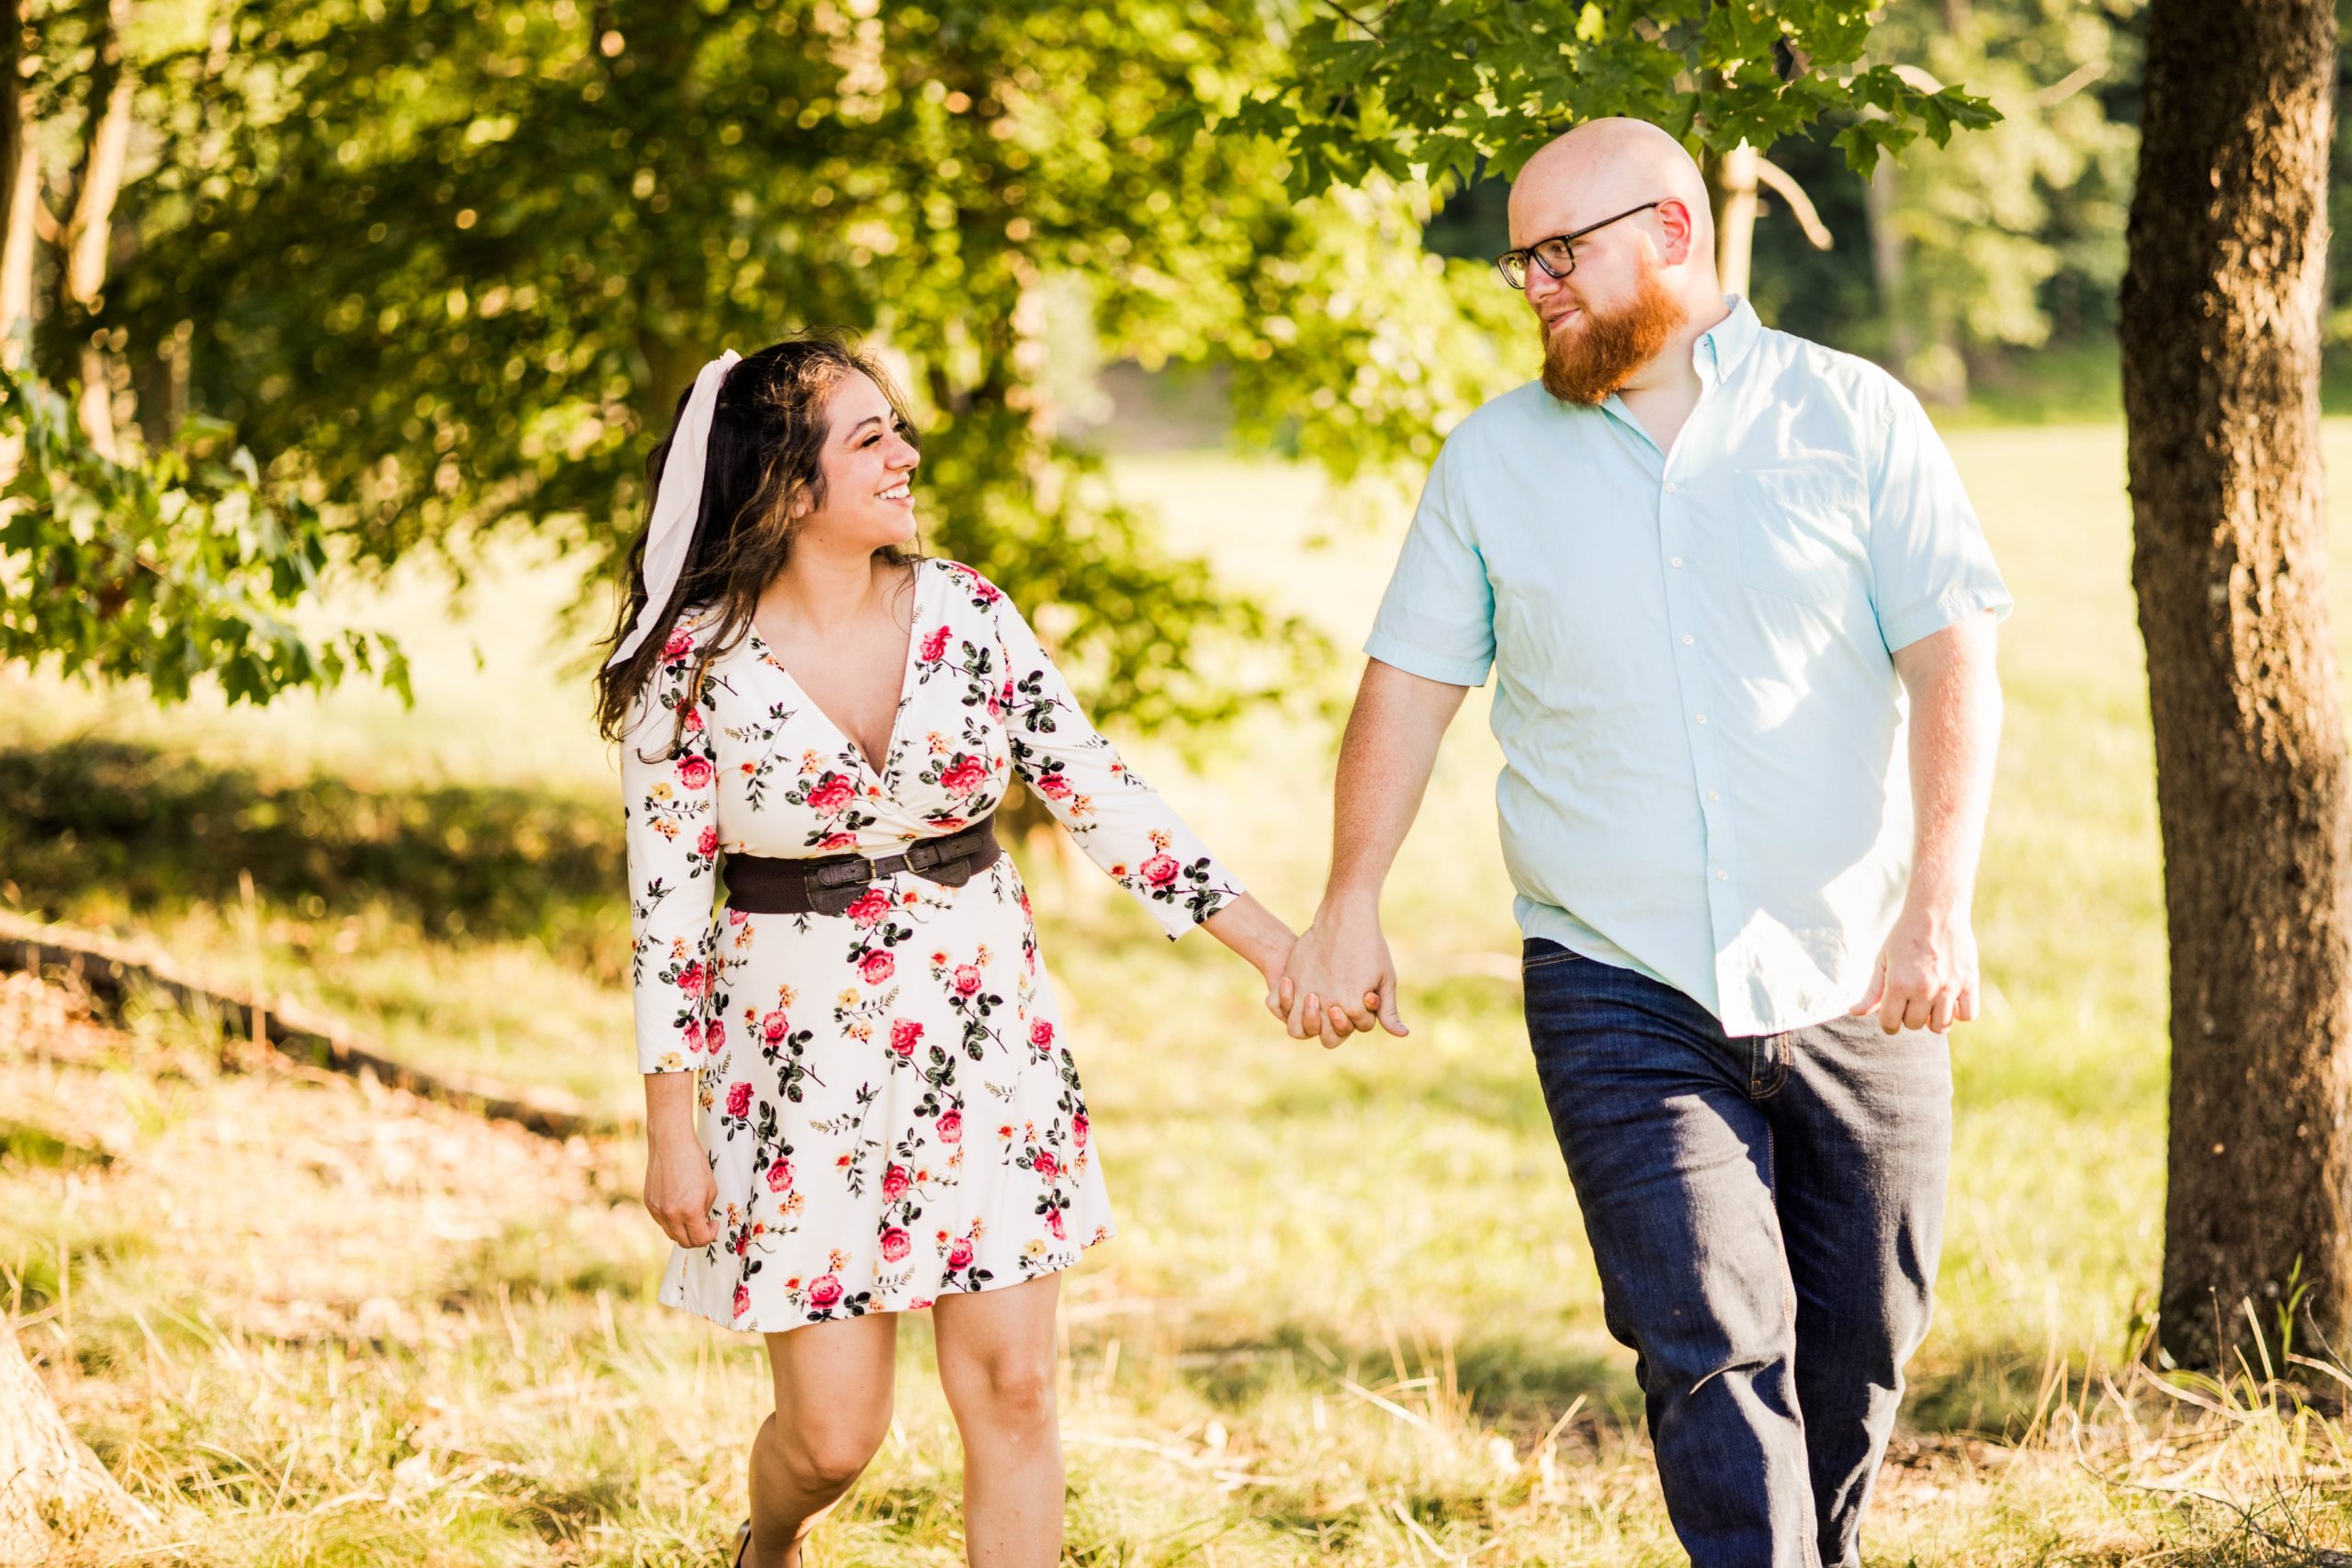 An engaged couple holding hands walking toward the photographer in a grove of tress while smiling and looking at one another in the summer.